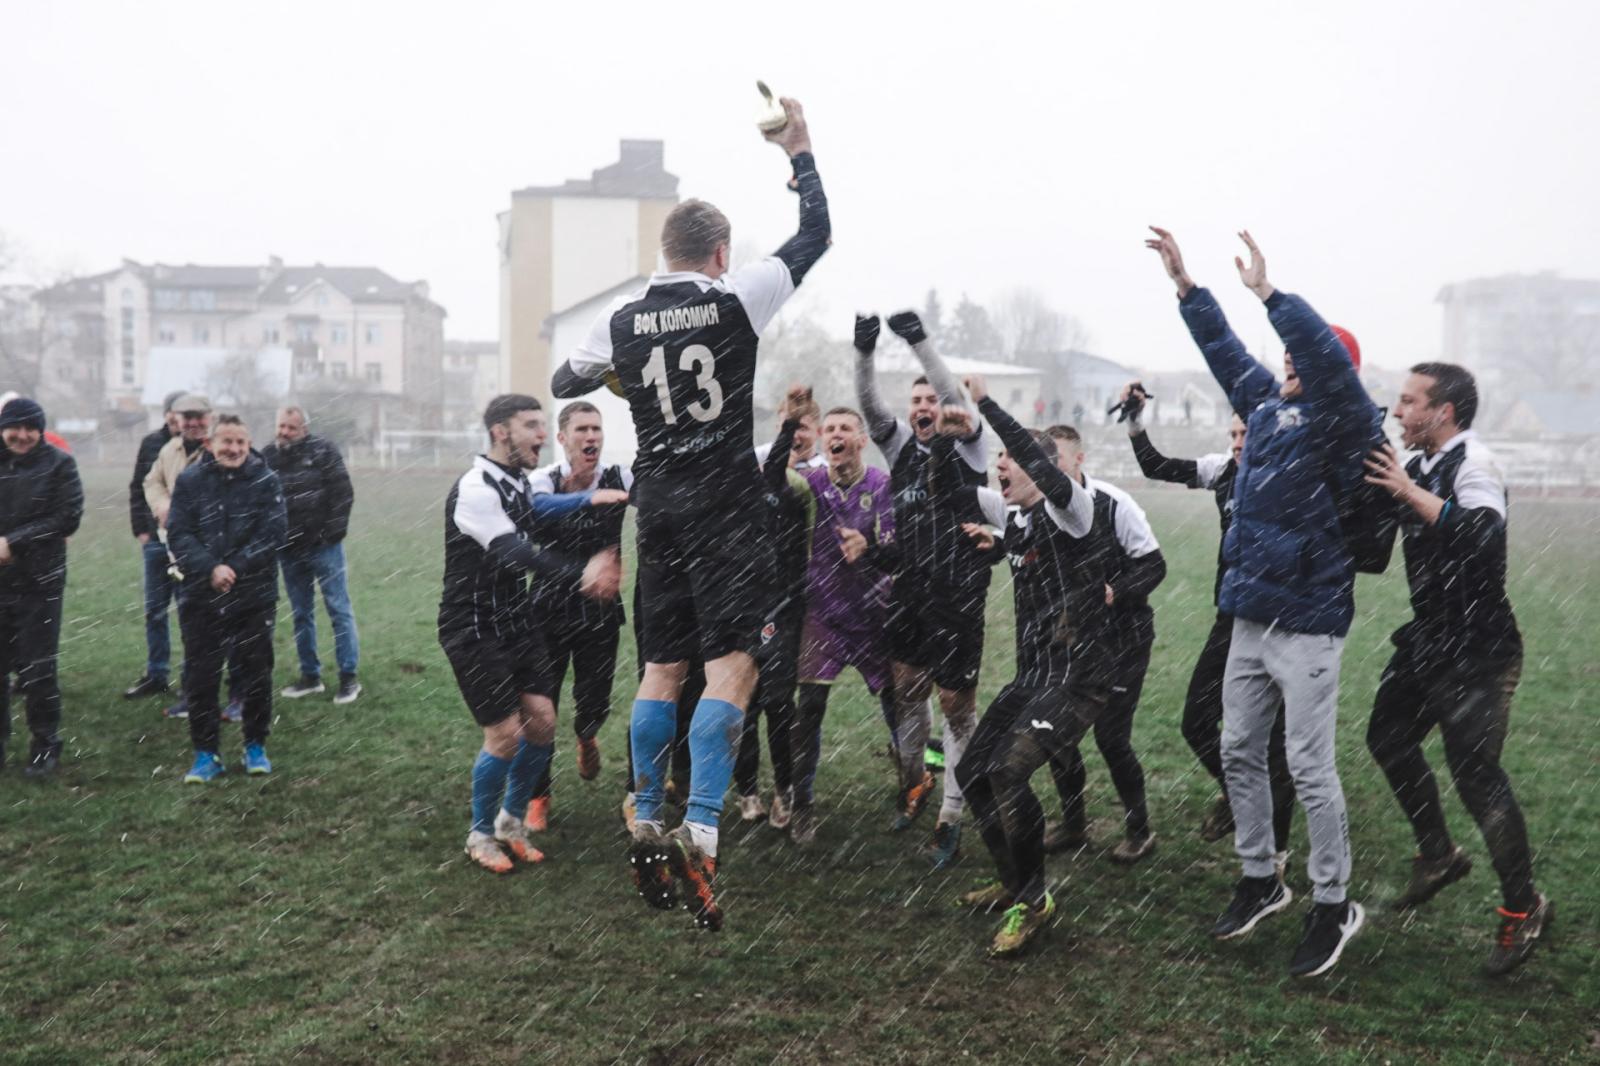 Anadolu/Getty - First vestige of football in Ukraine after more than 50 days of war - April 17, 2022. Ivanofranki First vestige of football in...